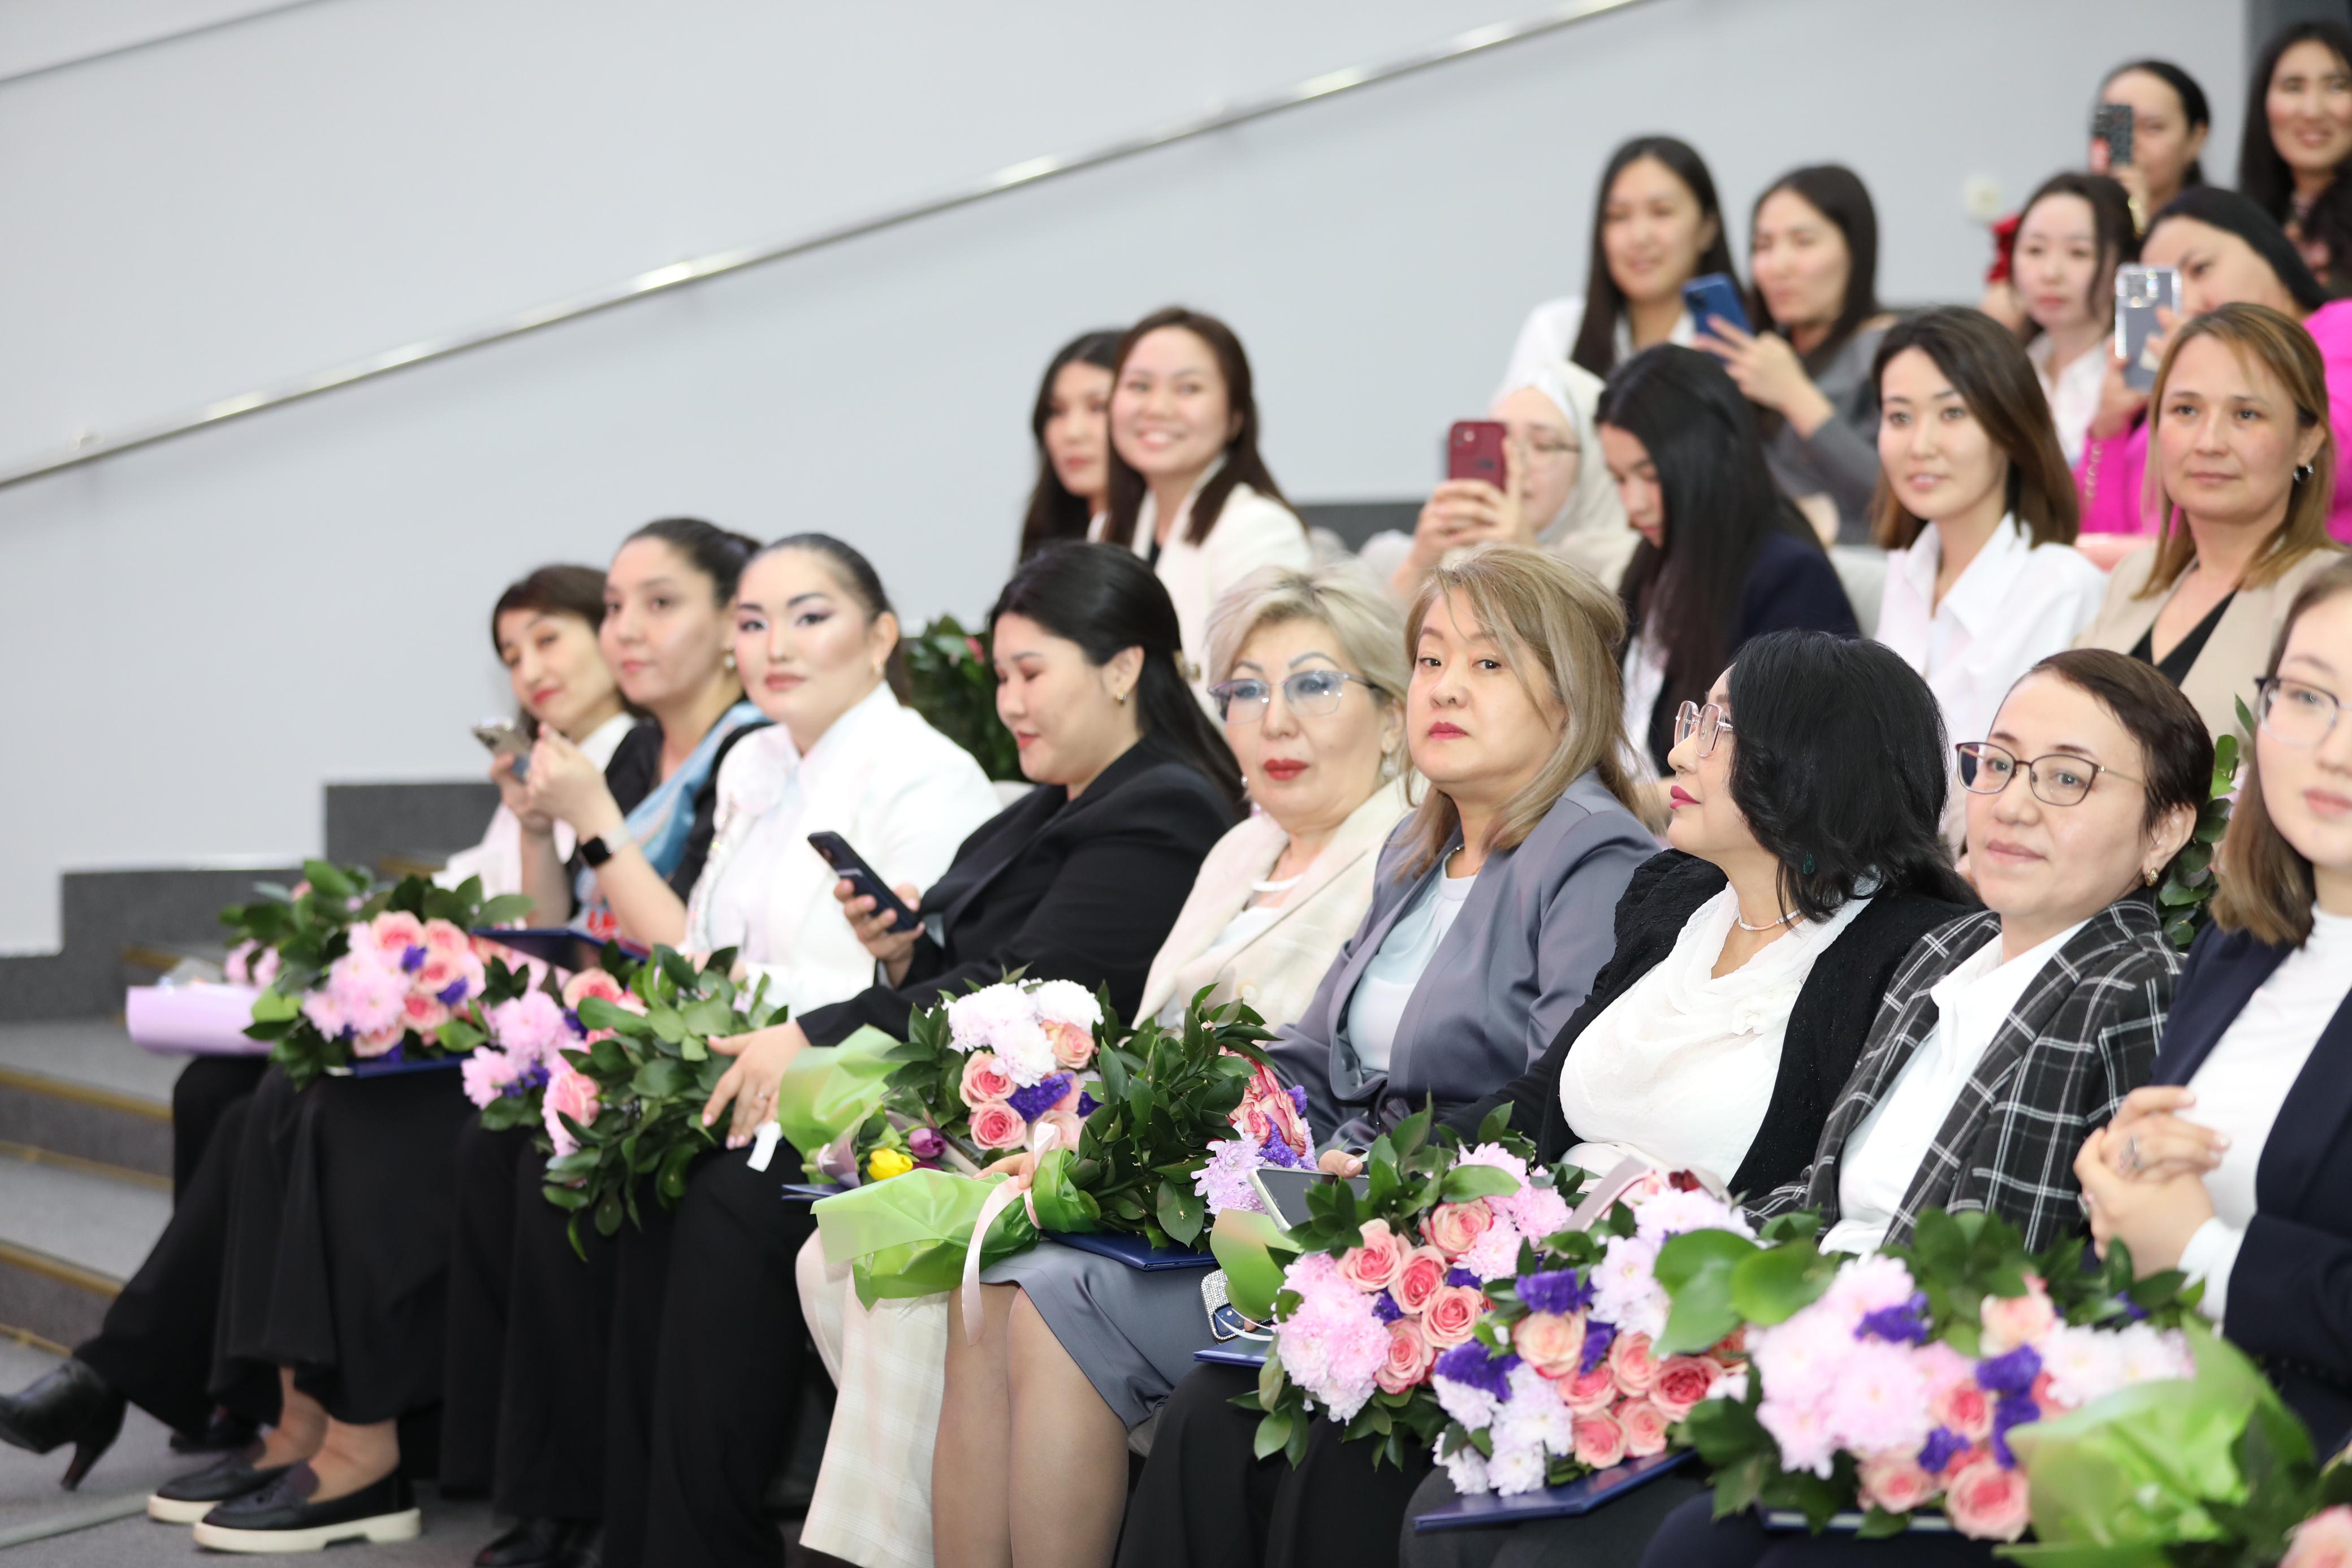 The Ministry of Industry and Construction of the Republic of Kazakhstan Celebrates International Women's Day